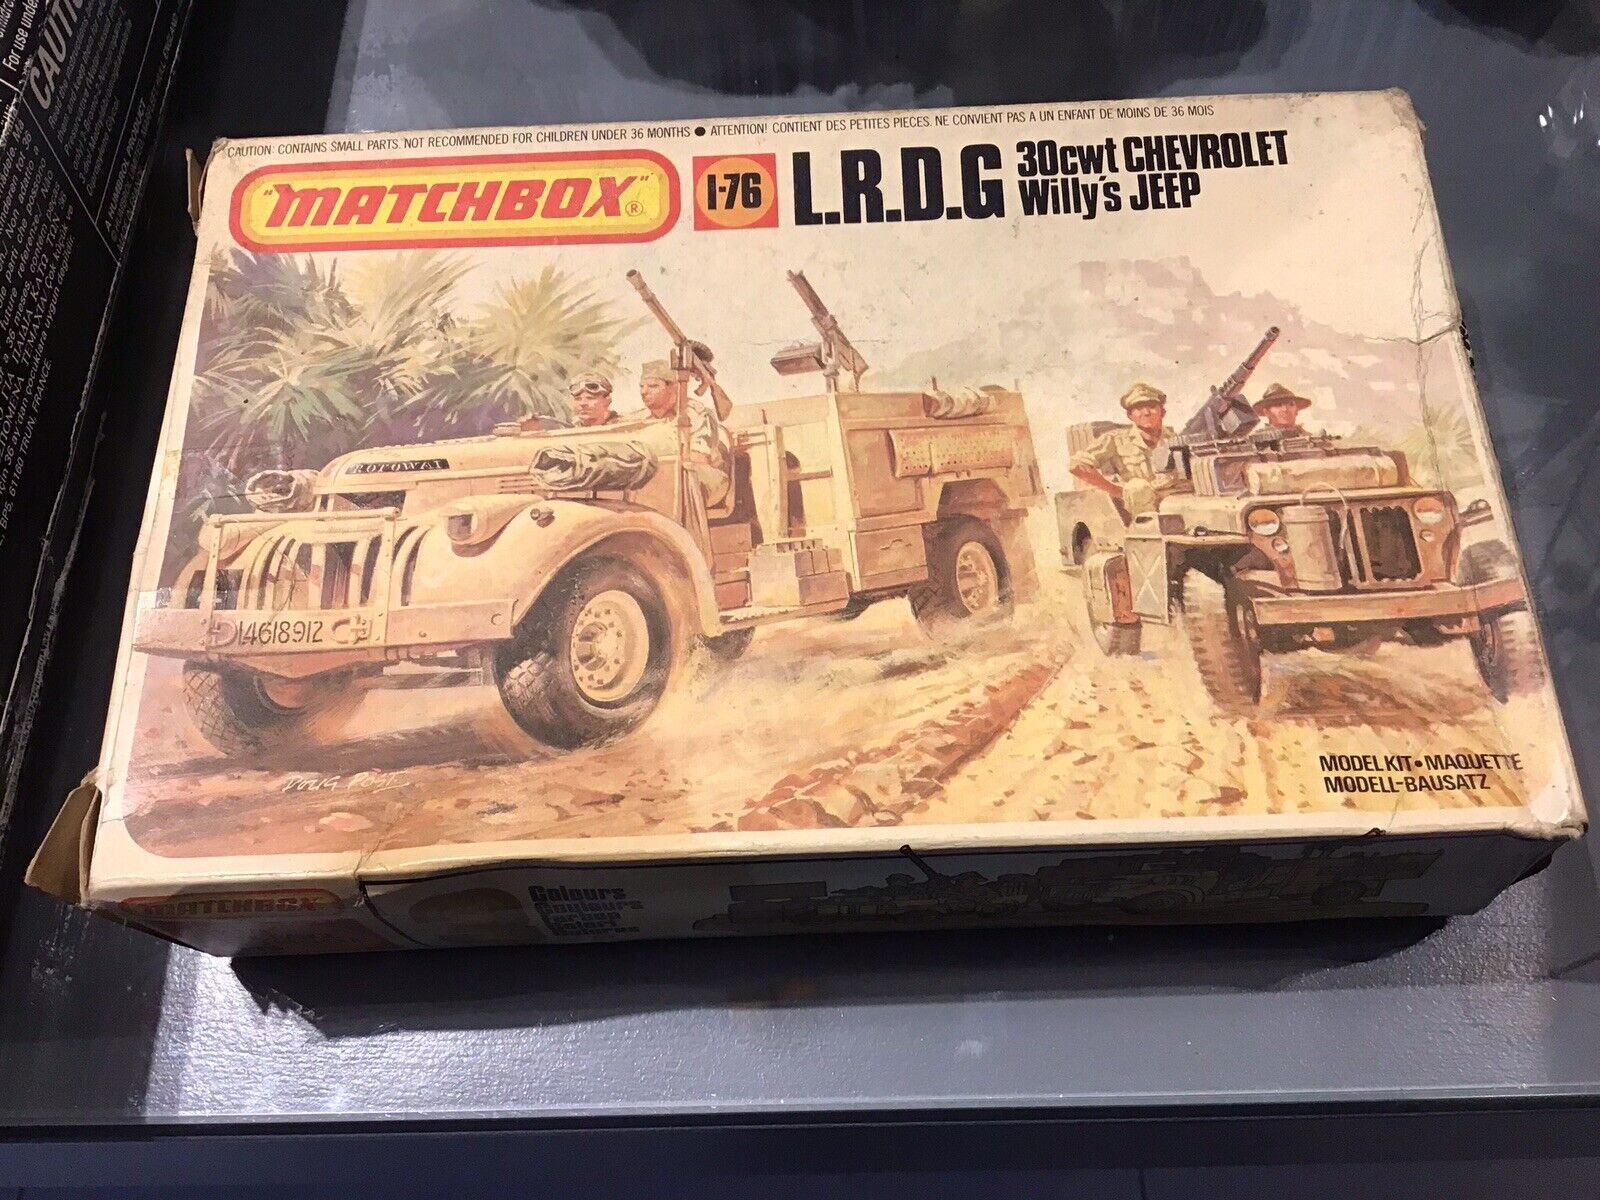 Matchbox L.R.D.G. 30cwt Chevrolet & Willy’s JEEP 1:76 scale model kit PK-173